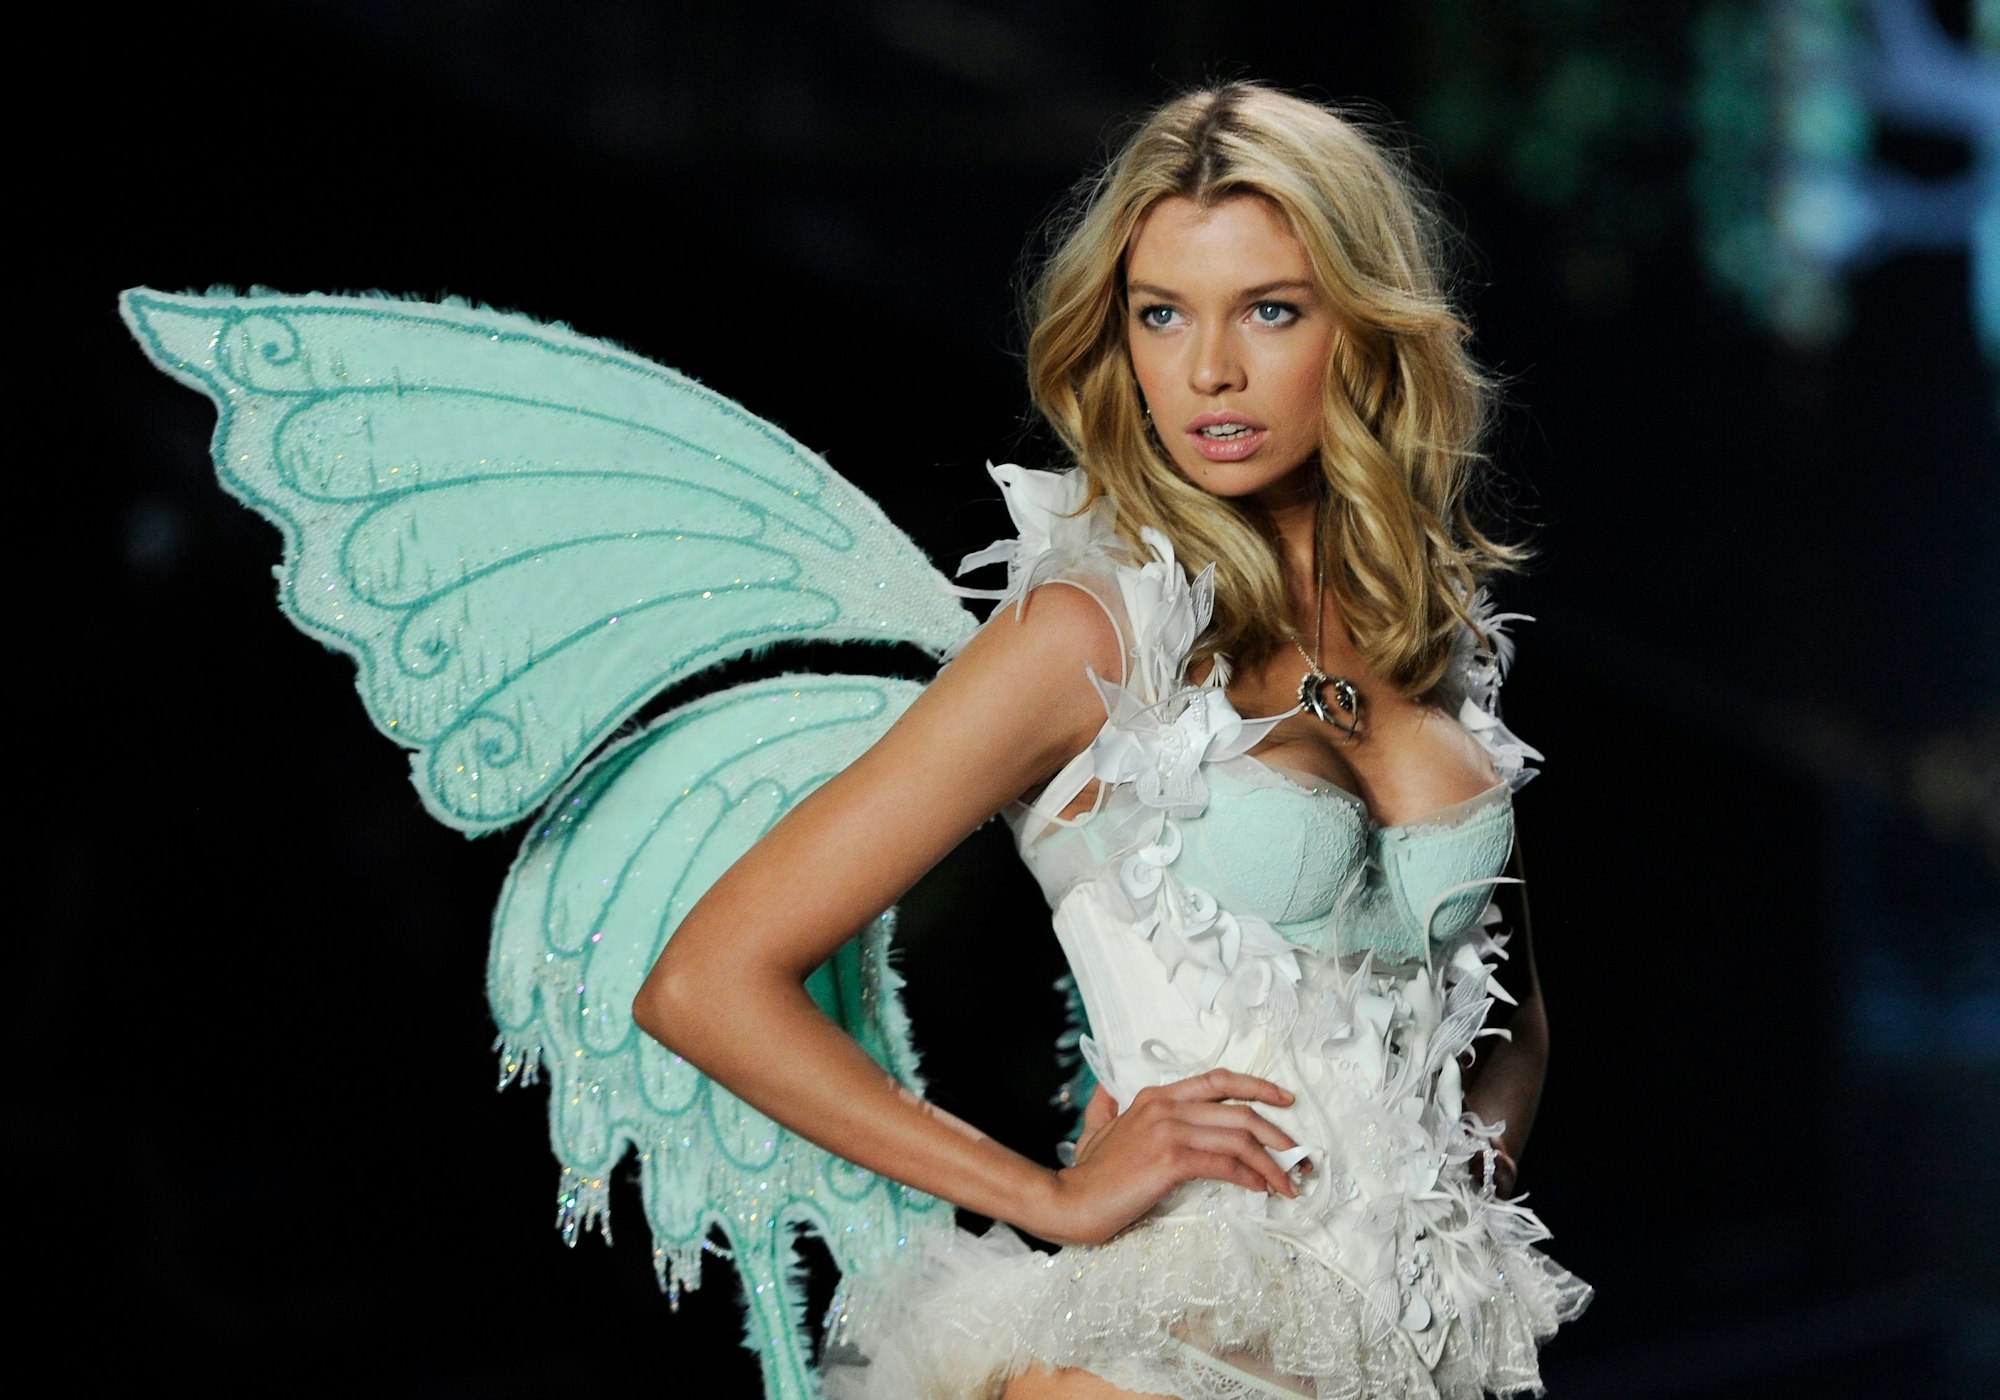 epa04512584 Model Stella Maxwell takes to the catwalk during the 2014 Victoria's Secret fashion show at the Exhibition Centre in Earls Court in central London, Britain, 02 December 2014. EPA/FACUNDO ARRIZABALAGA ++ +++ dpa-Bildfunk +++